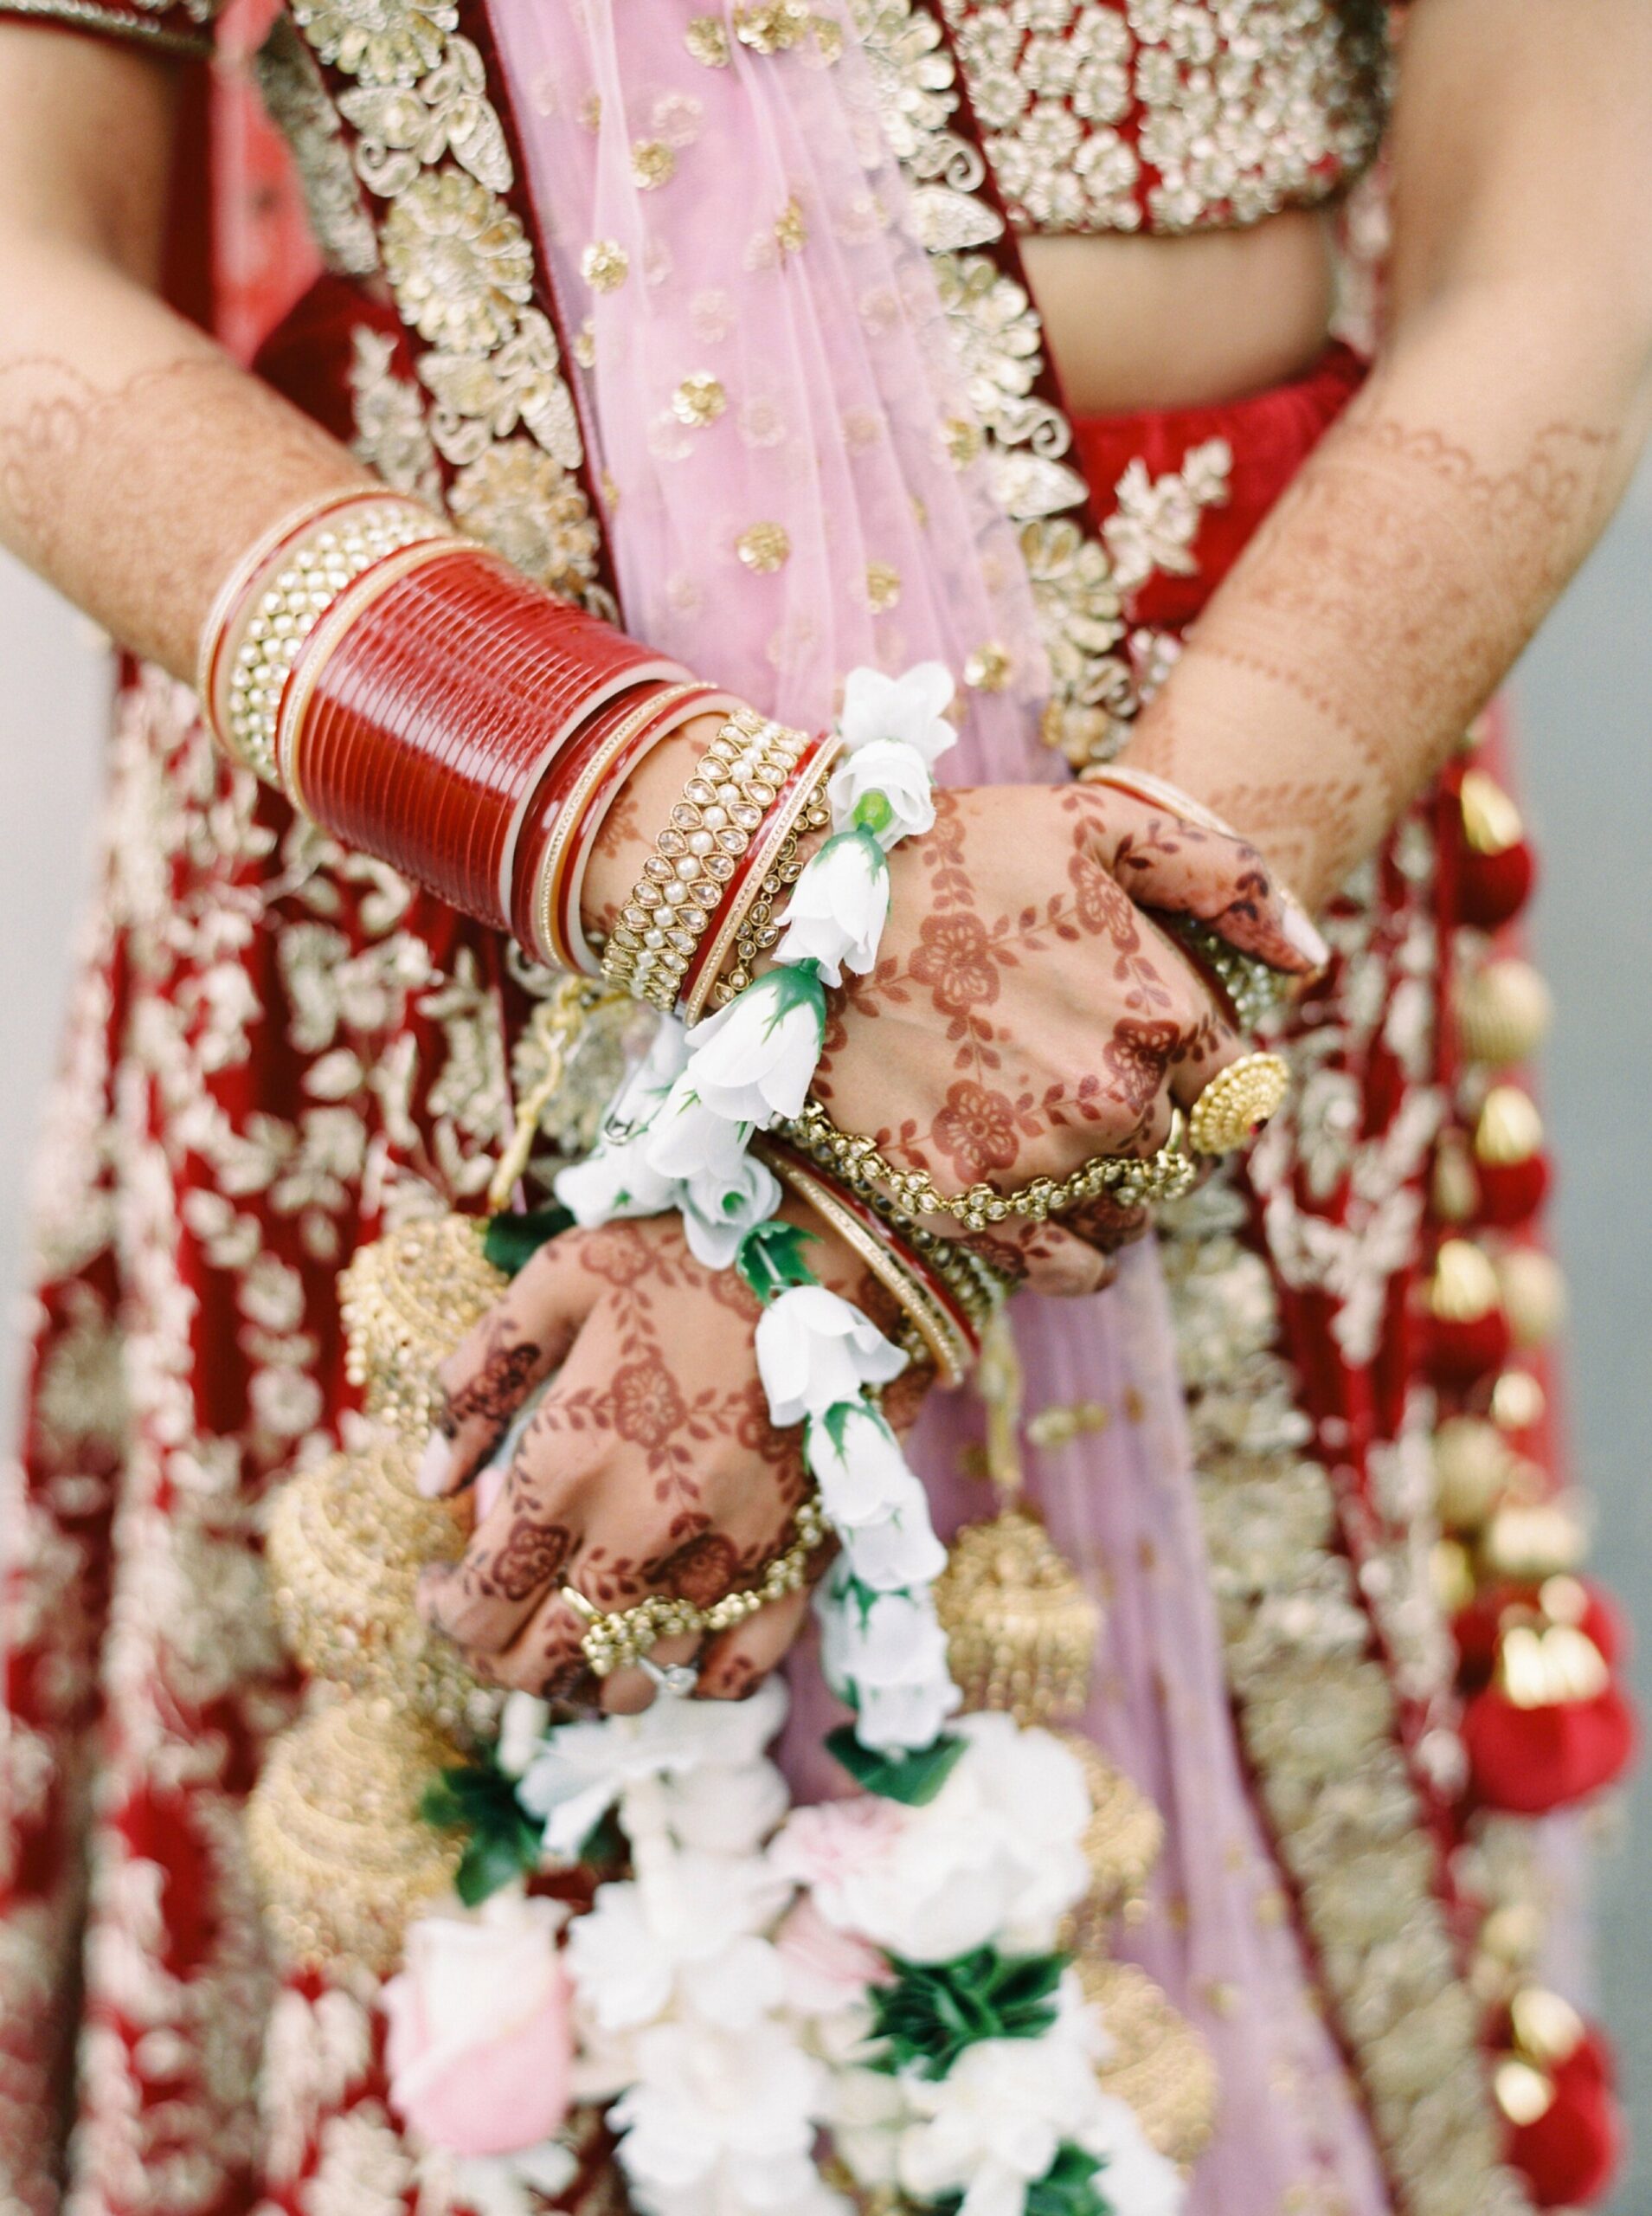 Sikh Temple wedding ceremony and portraits